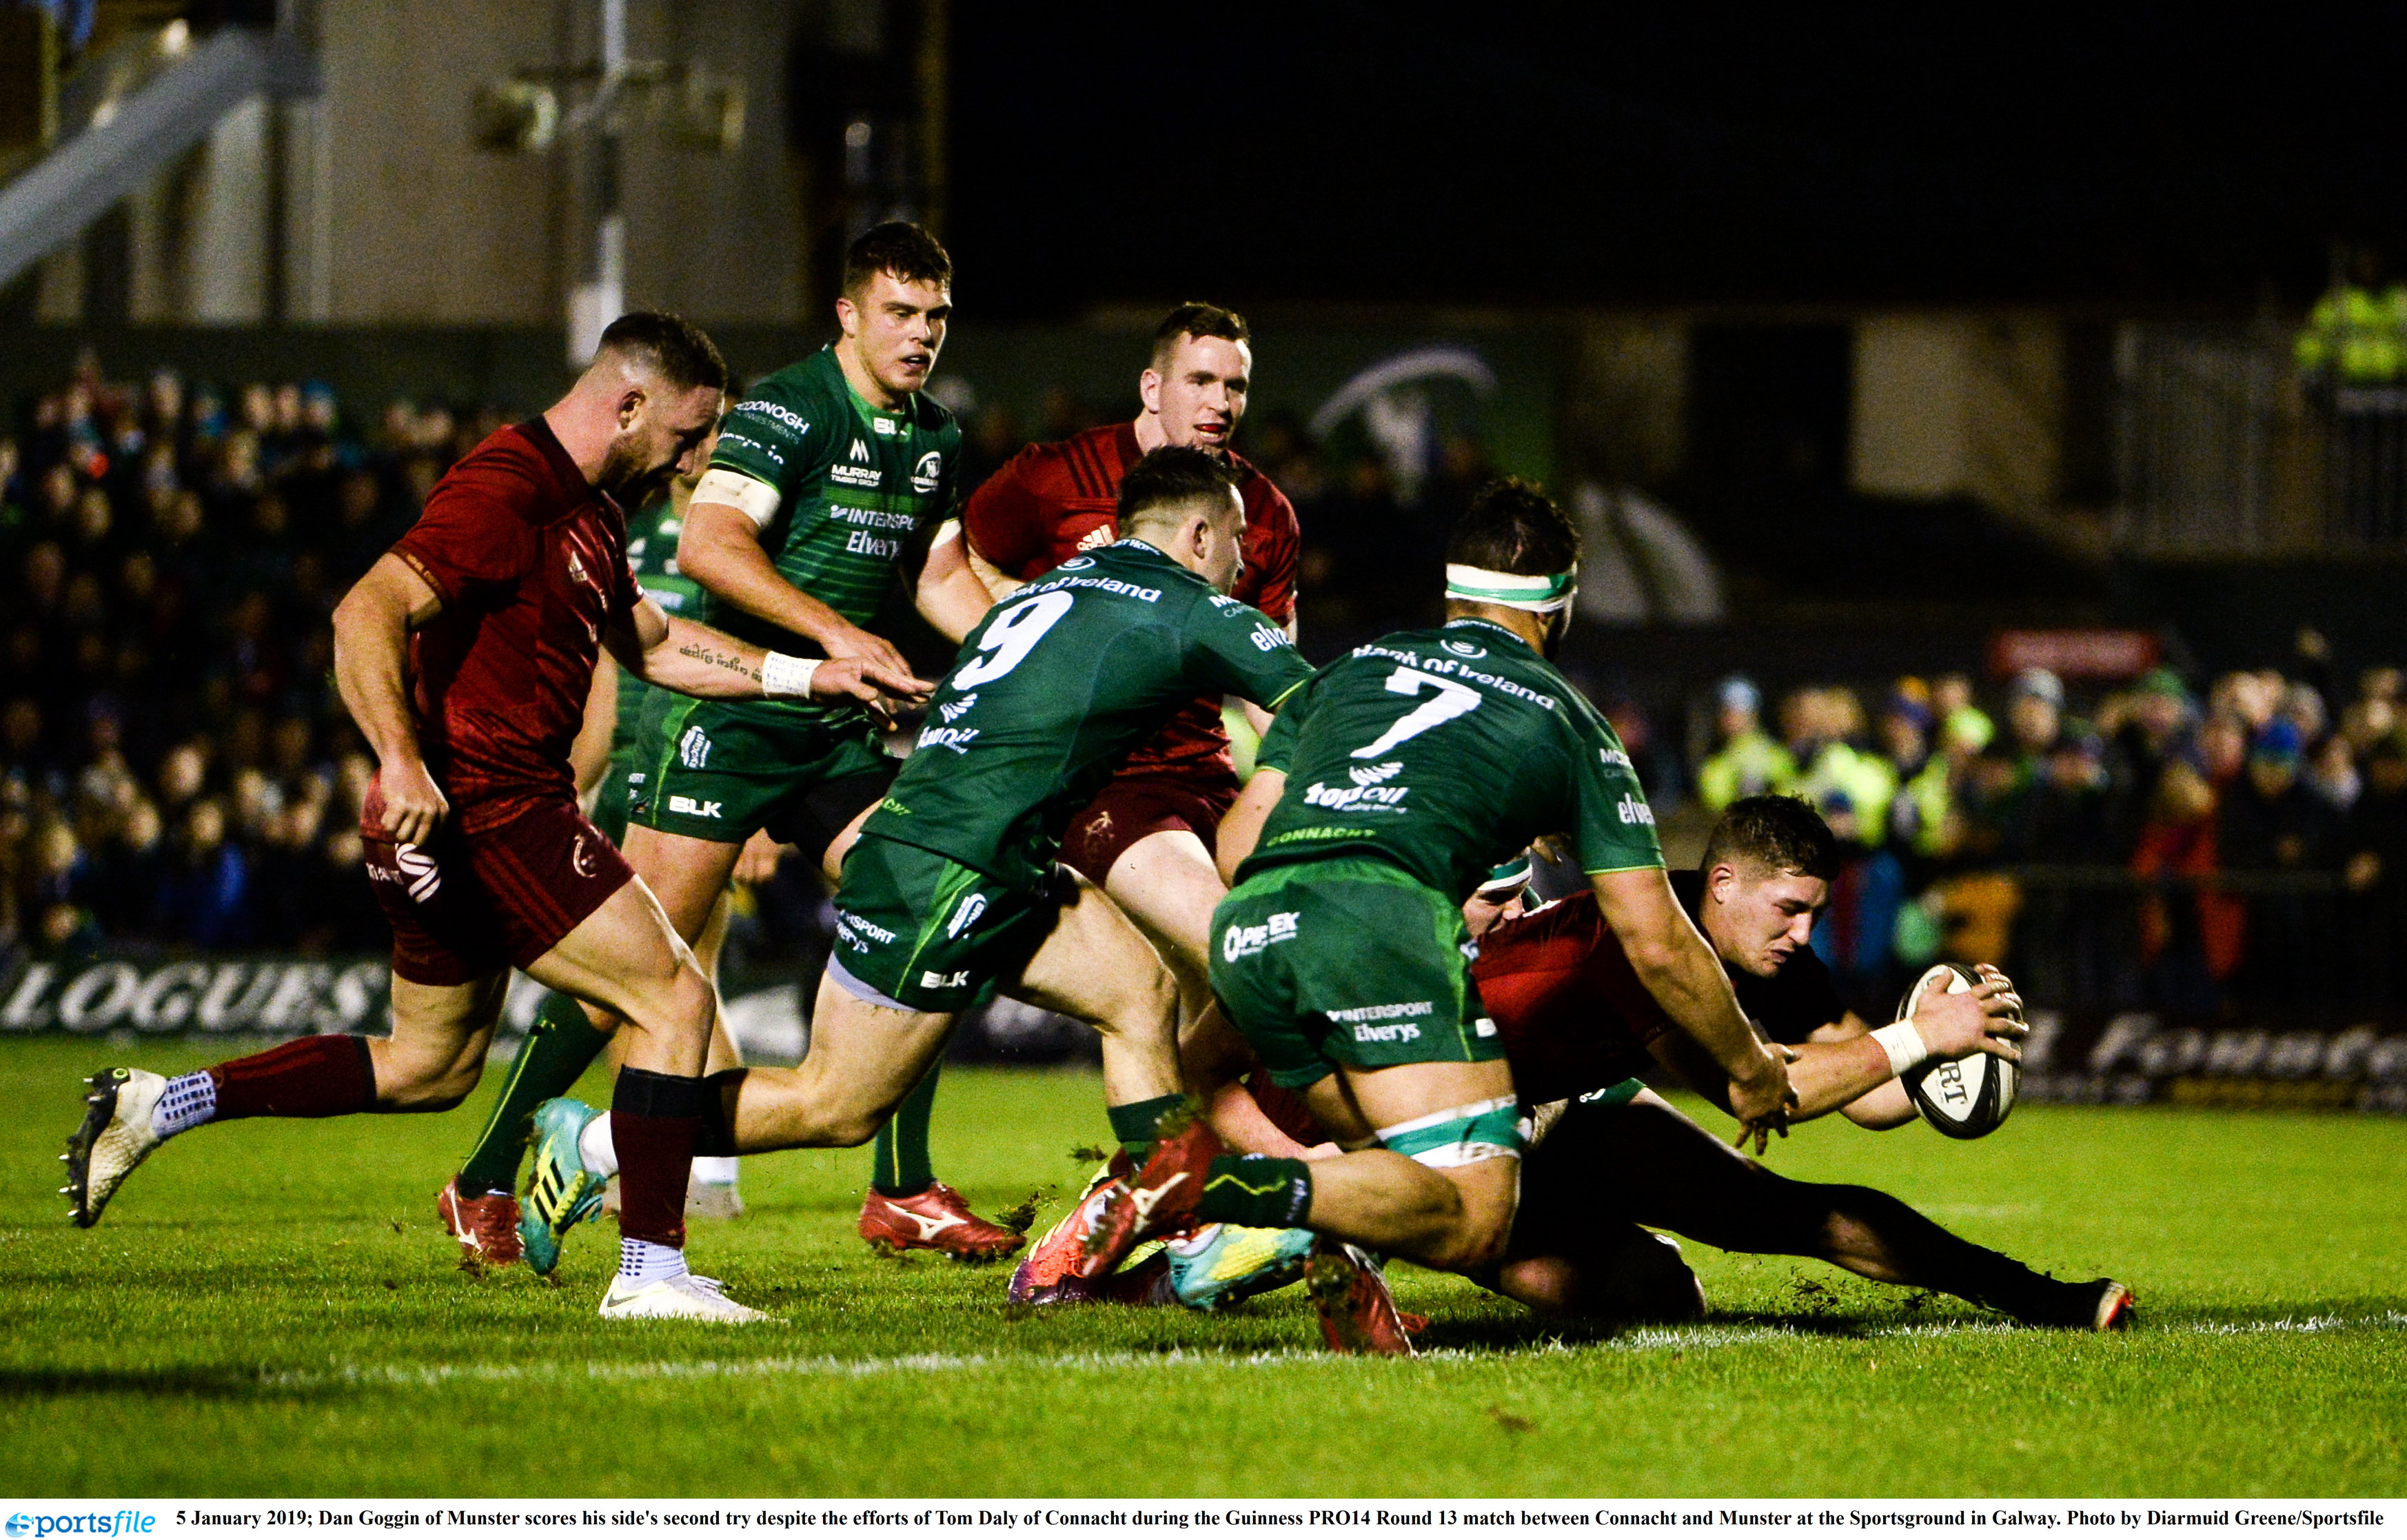 WATCH Munster move top of Conf A with bonus point win over Connacht